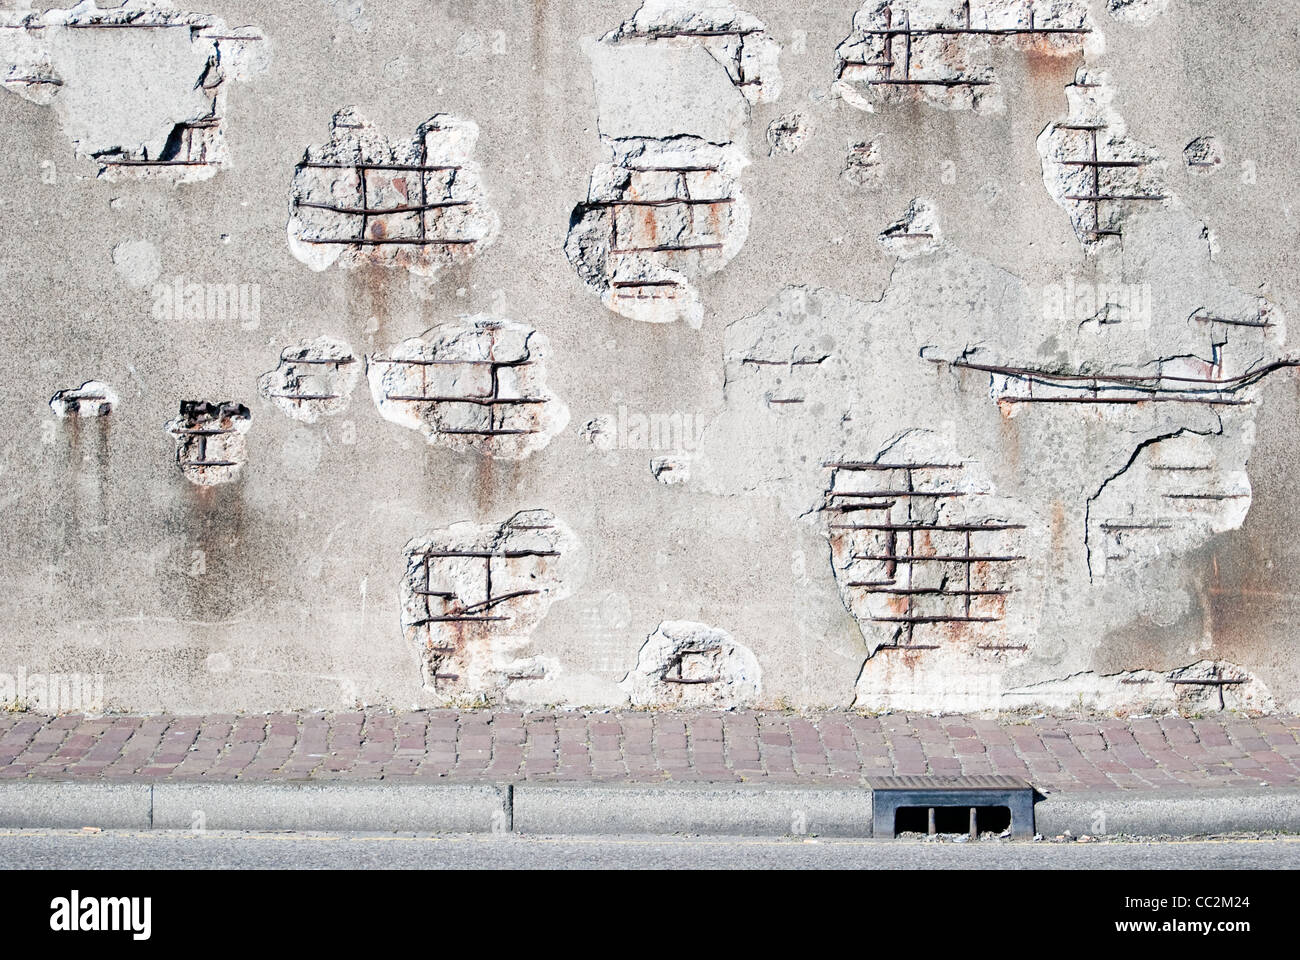 Decaying concrete wall with sidewalk Stock Photo